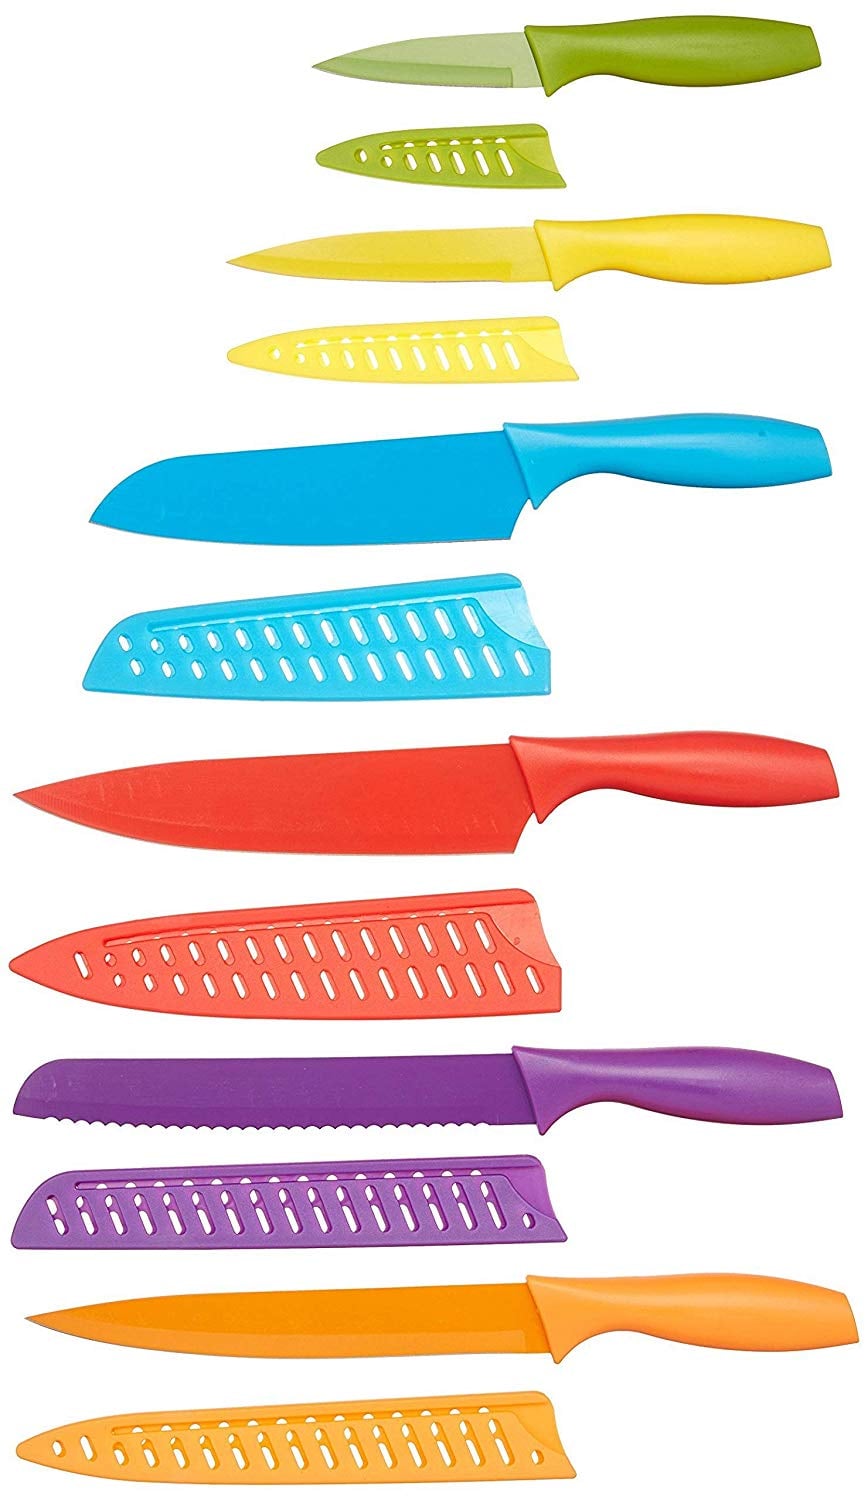 EATNEAT 12-Piece Colorful Kitchen Knife Set - 5 Colored Stainless